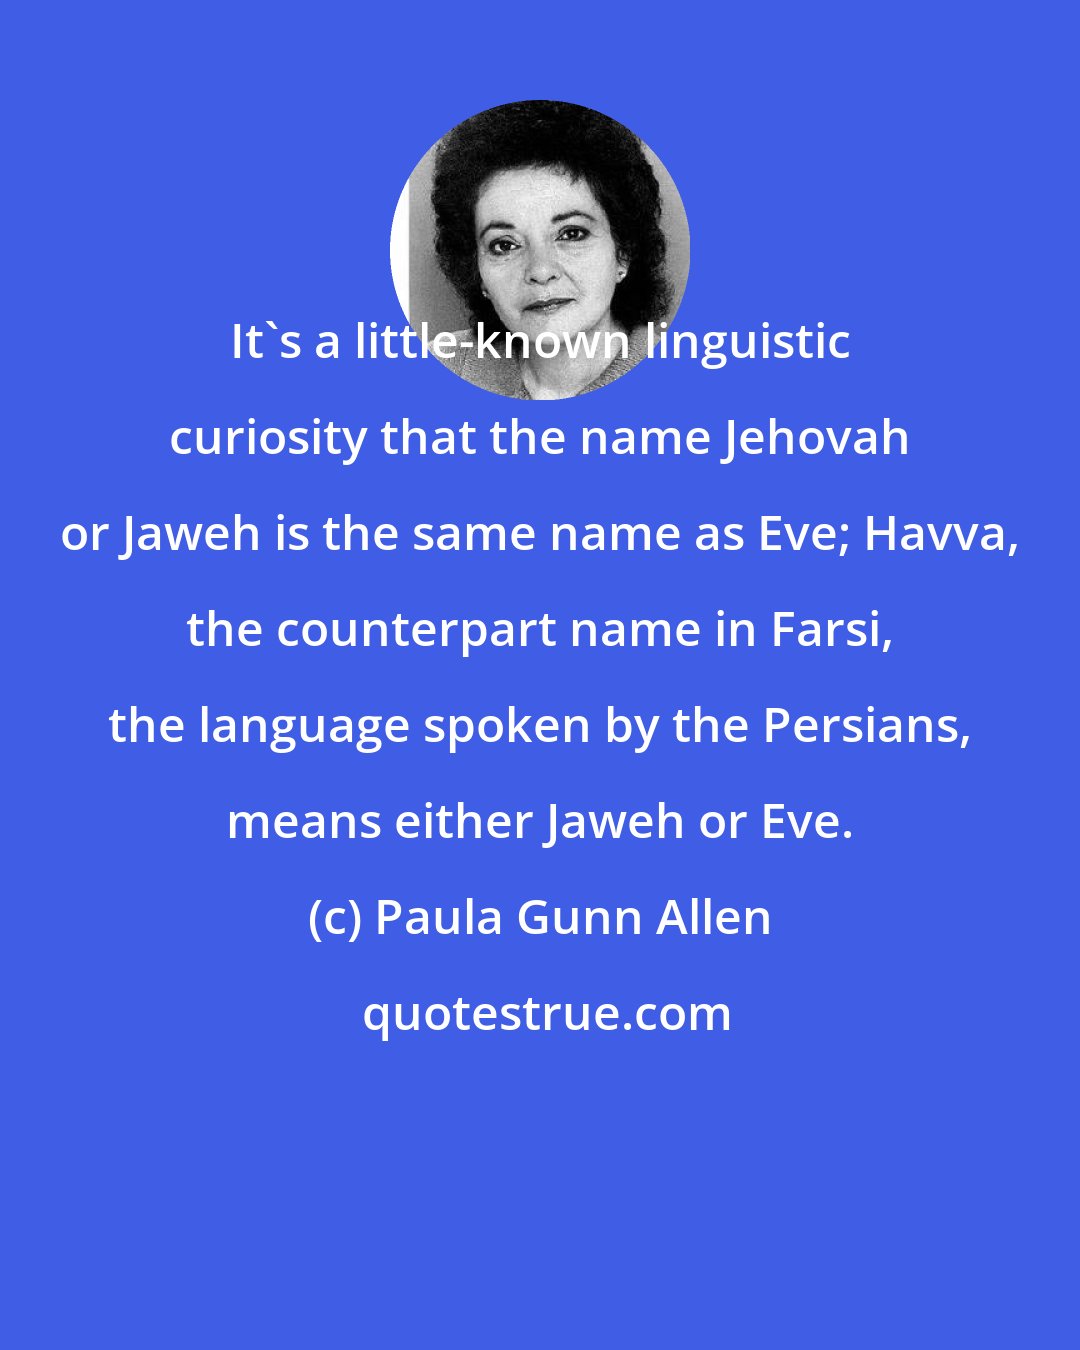 Paula Gunn Allen: It's a little-known linguistic curiosity that the name Jehovah or Jaweh is the same name as Eve; Havva, the counterpart name in Farsi, the language spoken by the Persians, means either Jaweh or Eve.